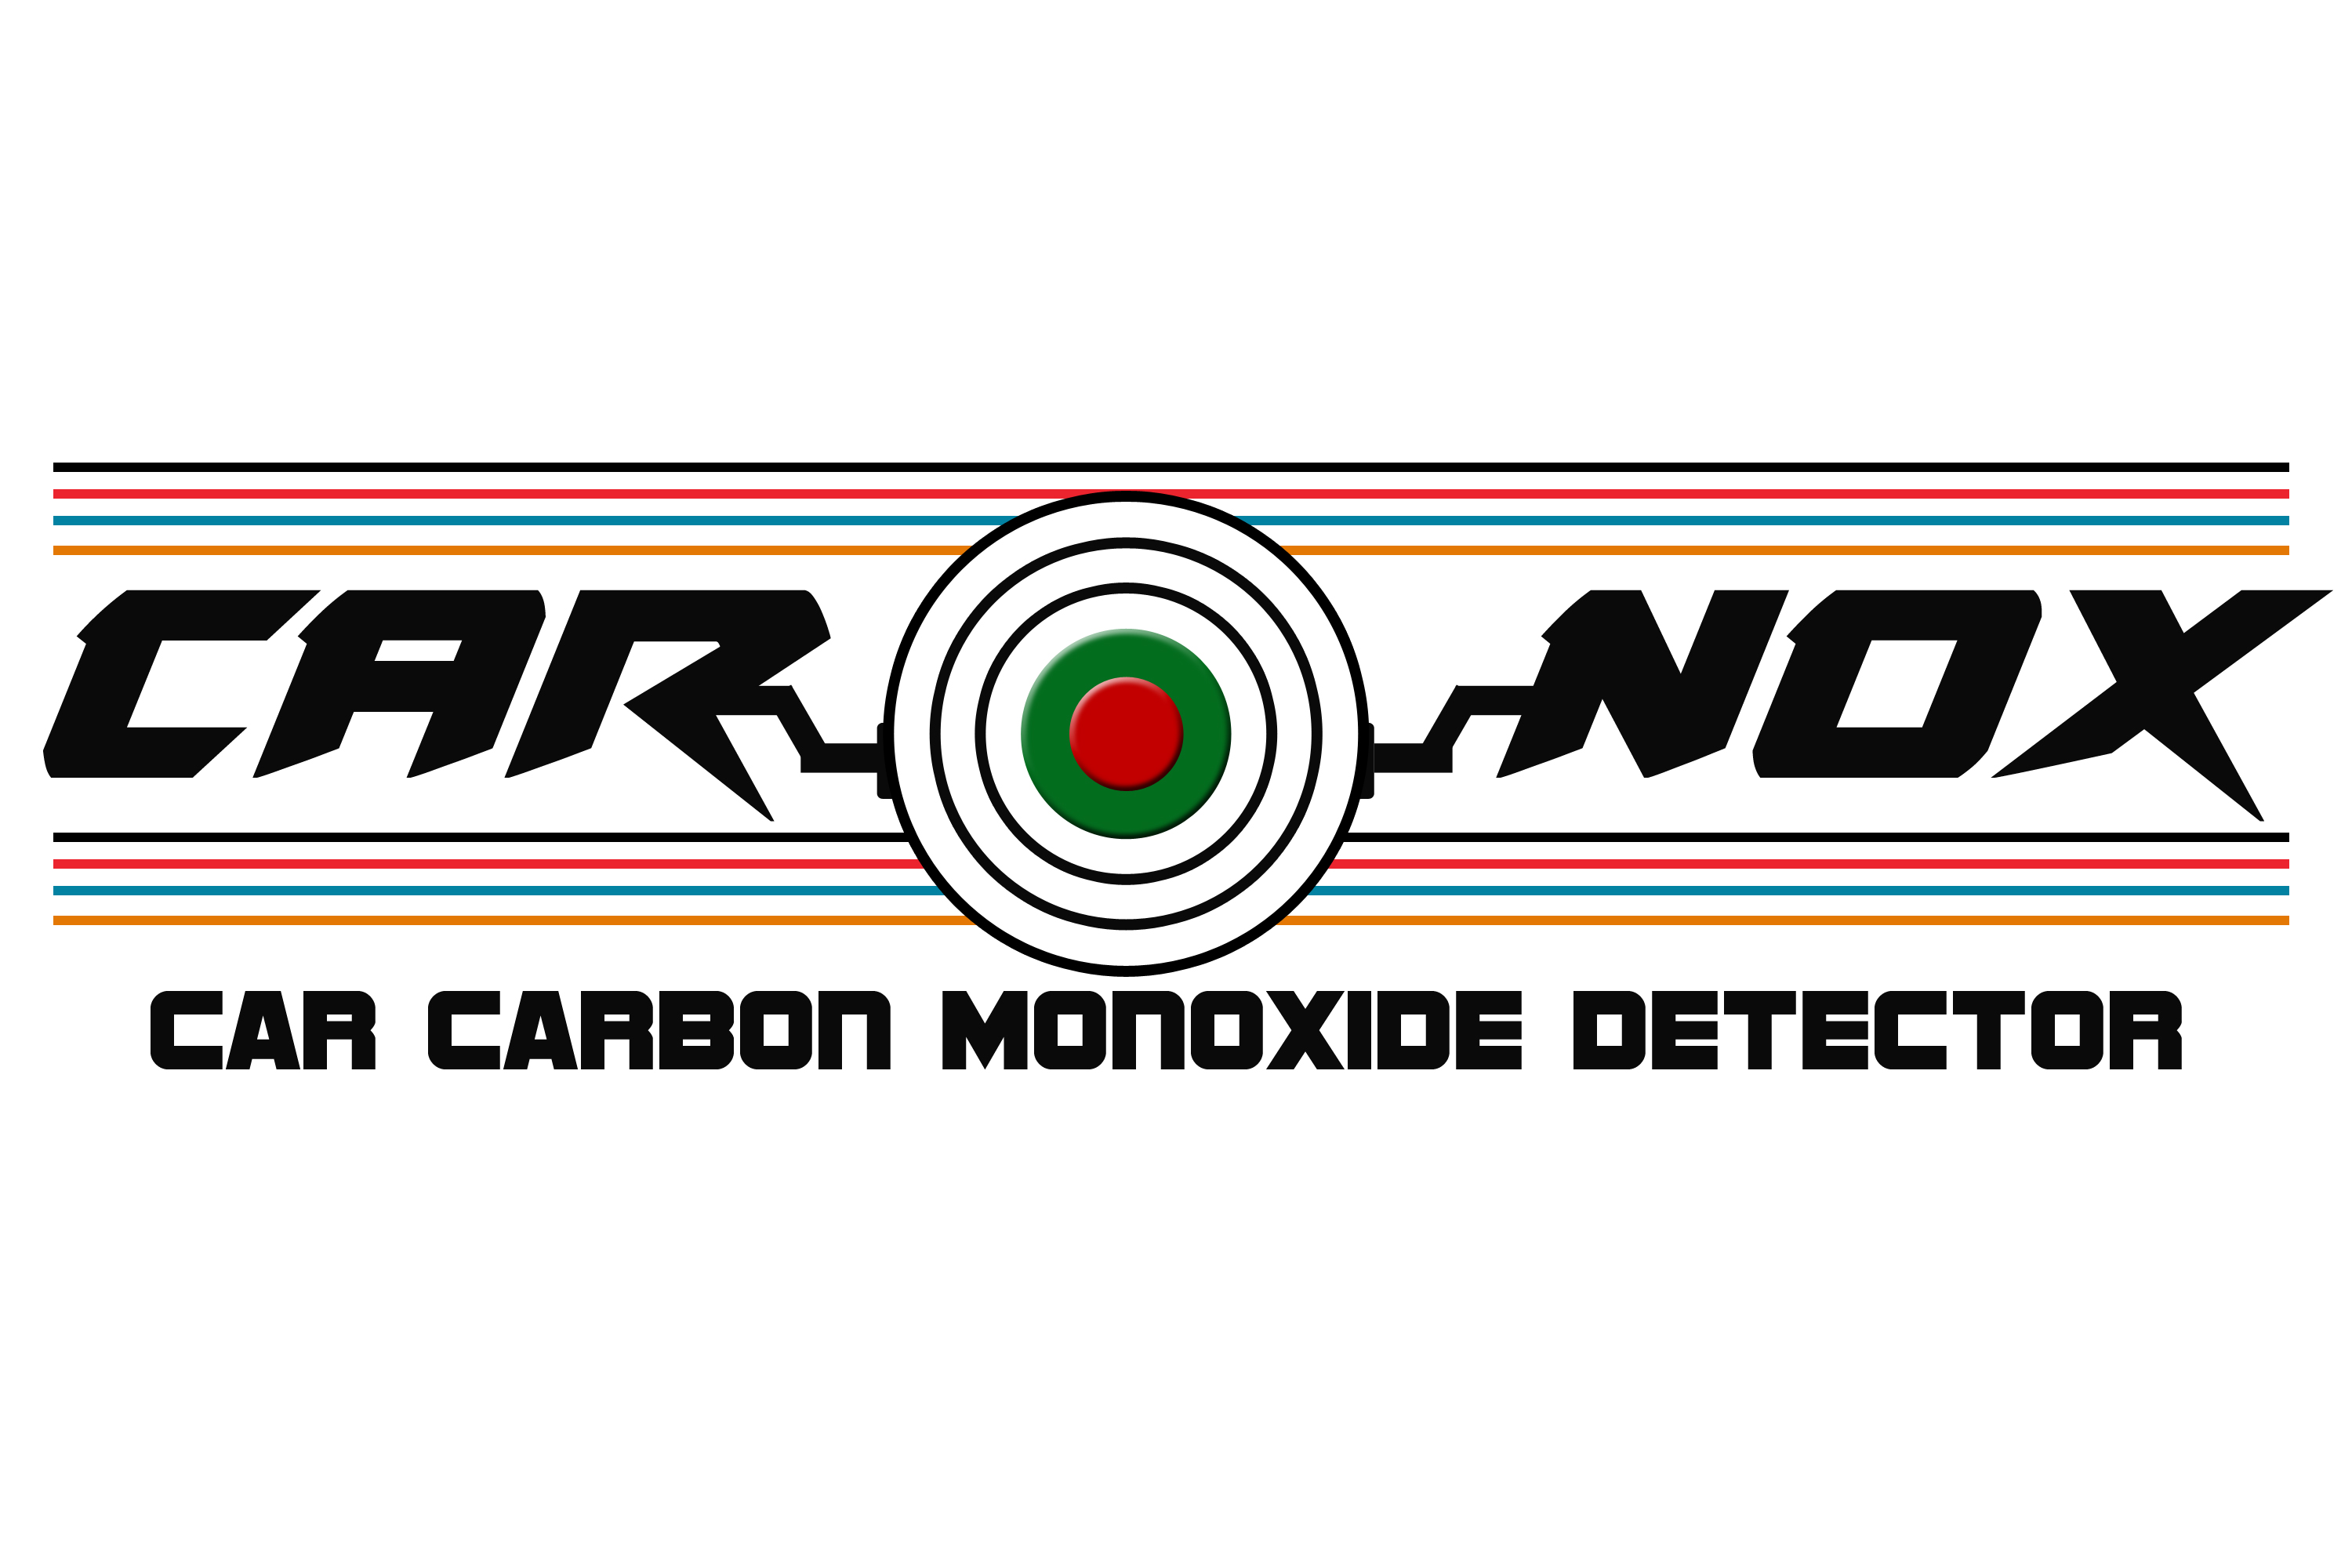 The Car Nox is a life saving carbon monoxide detection device. It would be installed in new & older vehicles through the computer, ignition, power lock & window systems